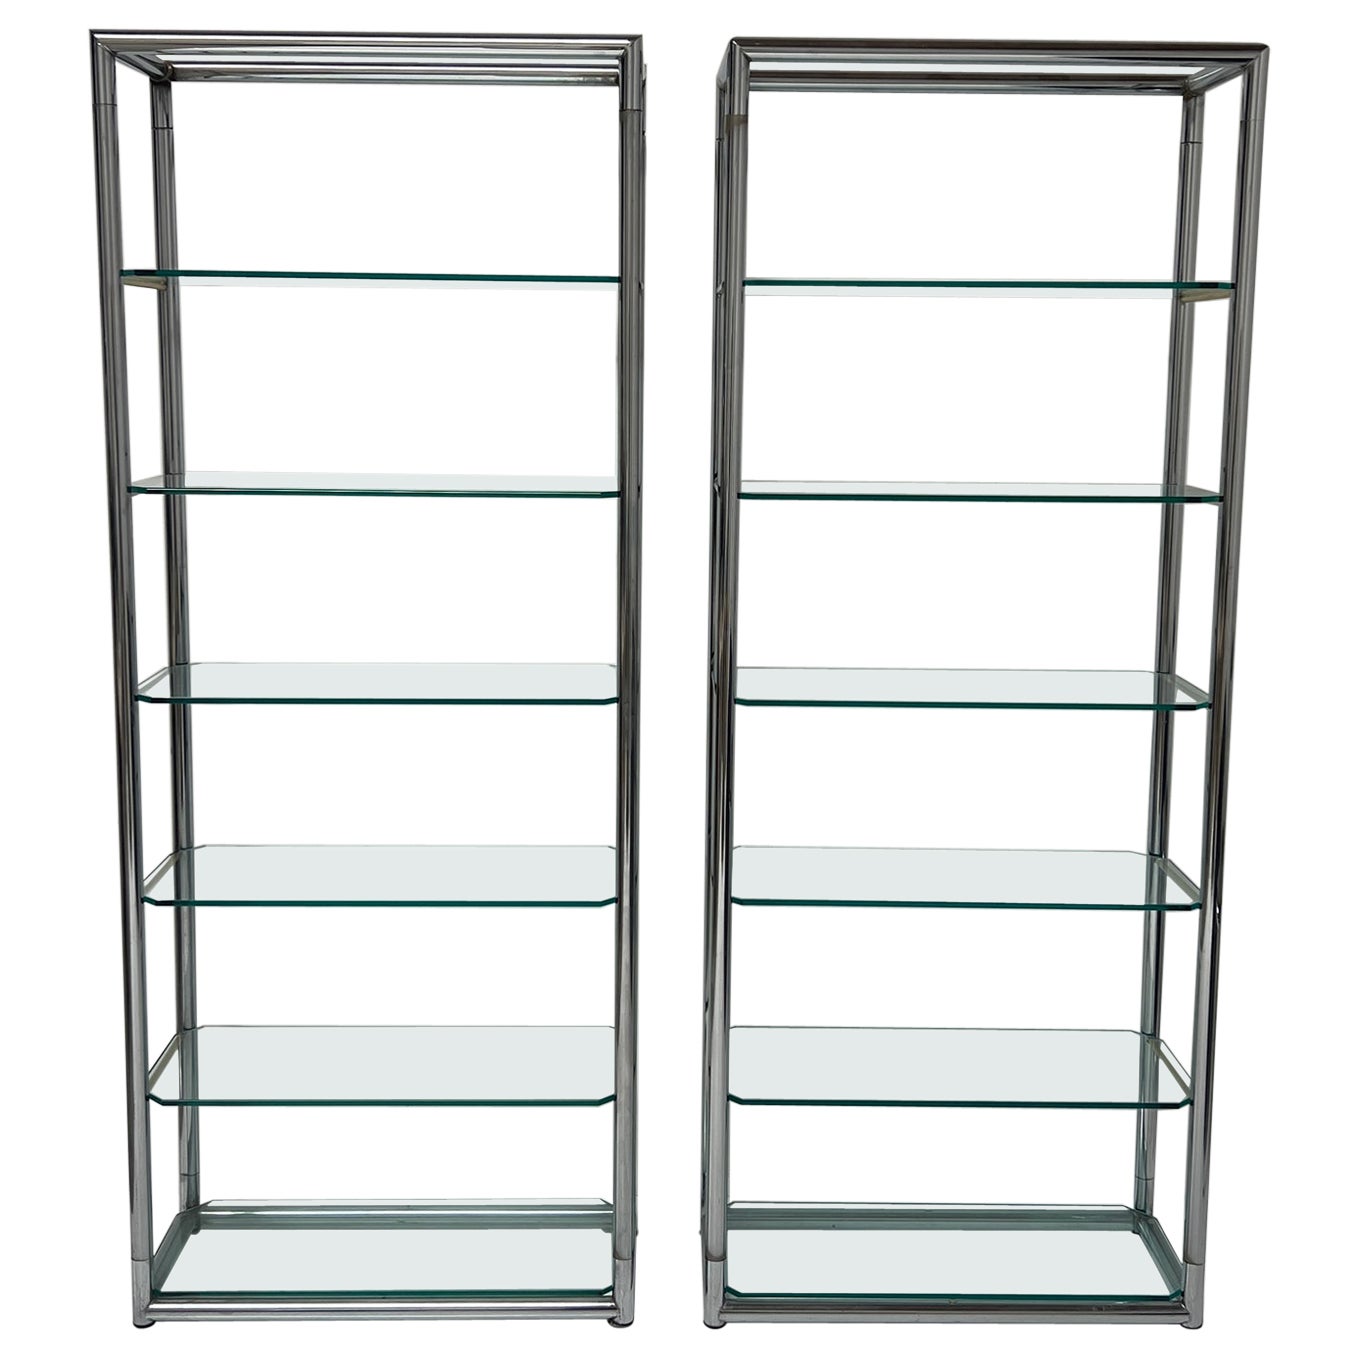 1980s Chrome Etagere Shelving Unit with Glass Shelves  For Sale